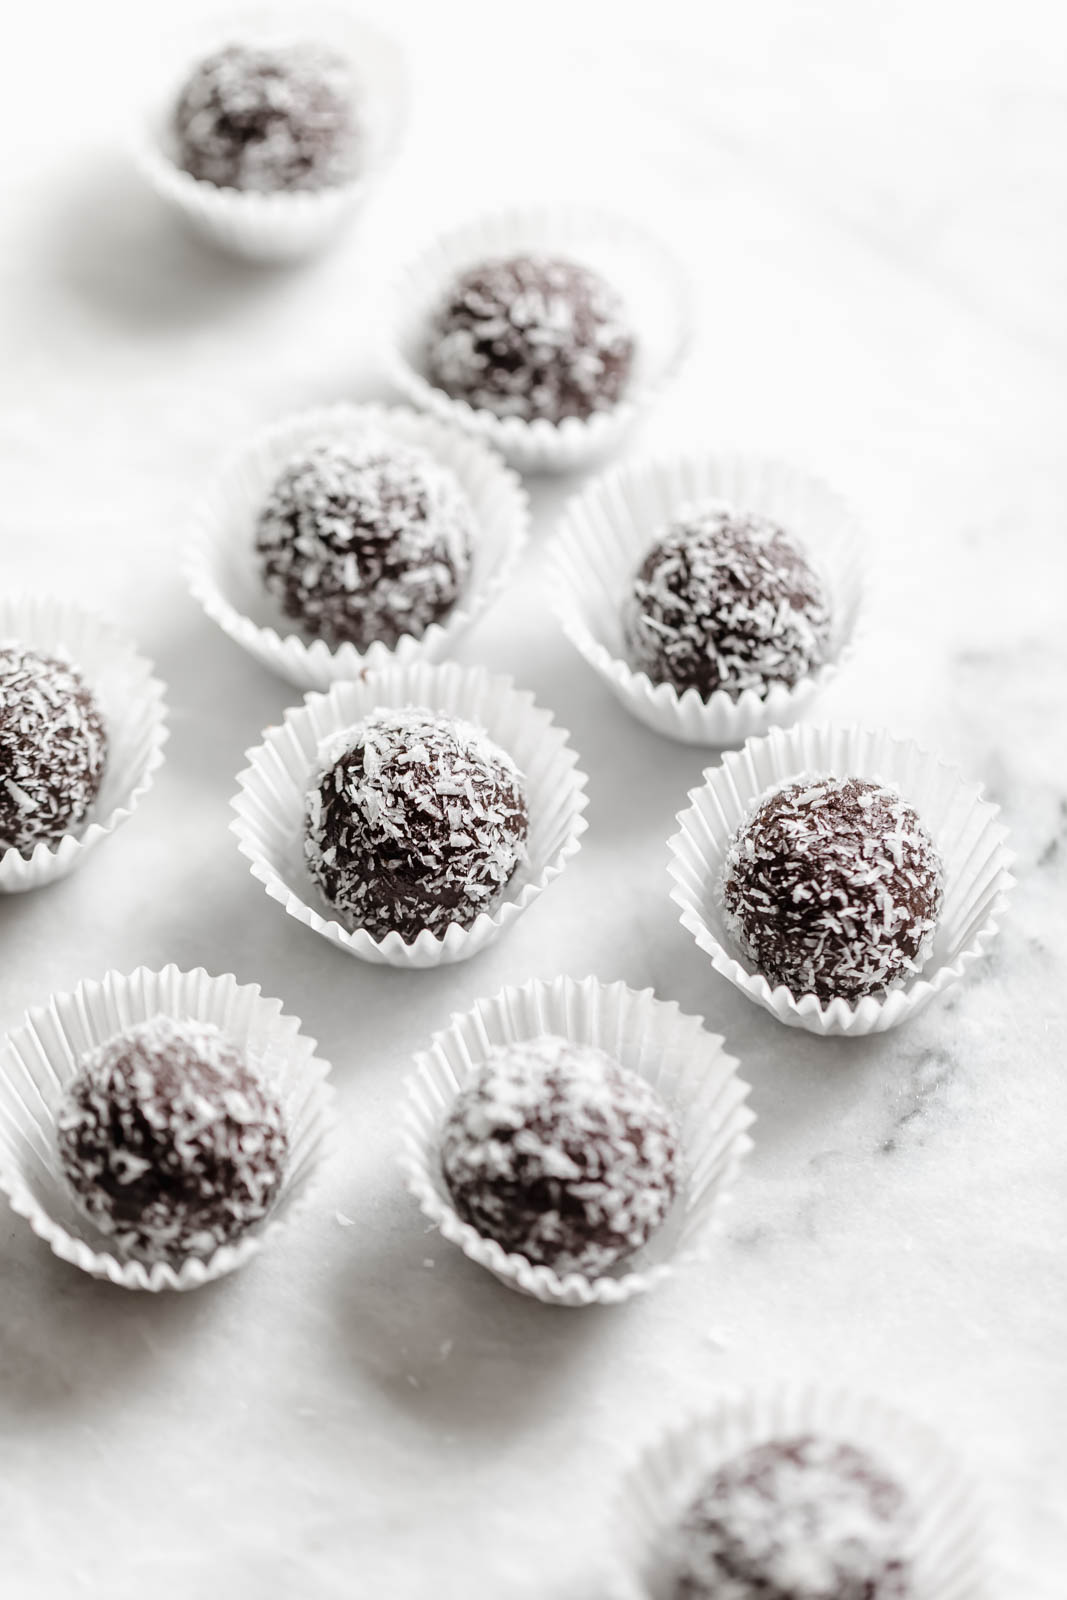 chocolate date balls rolled in coconut